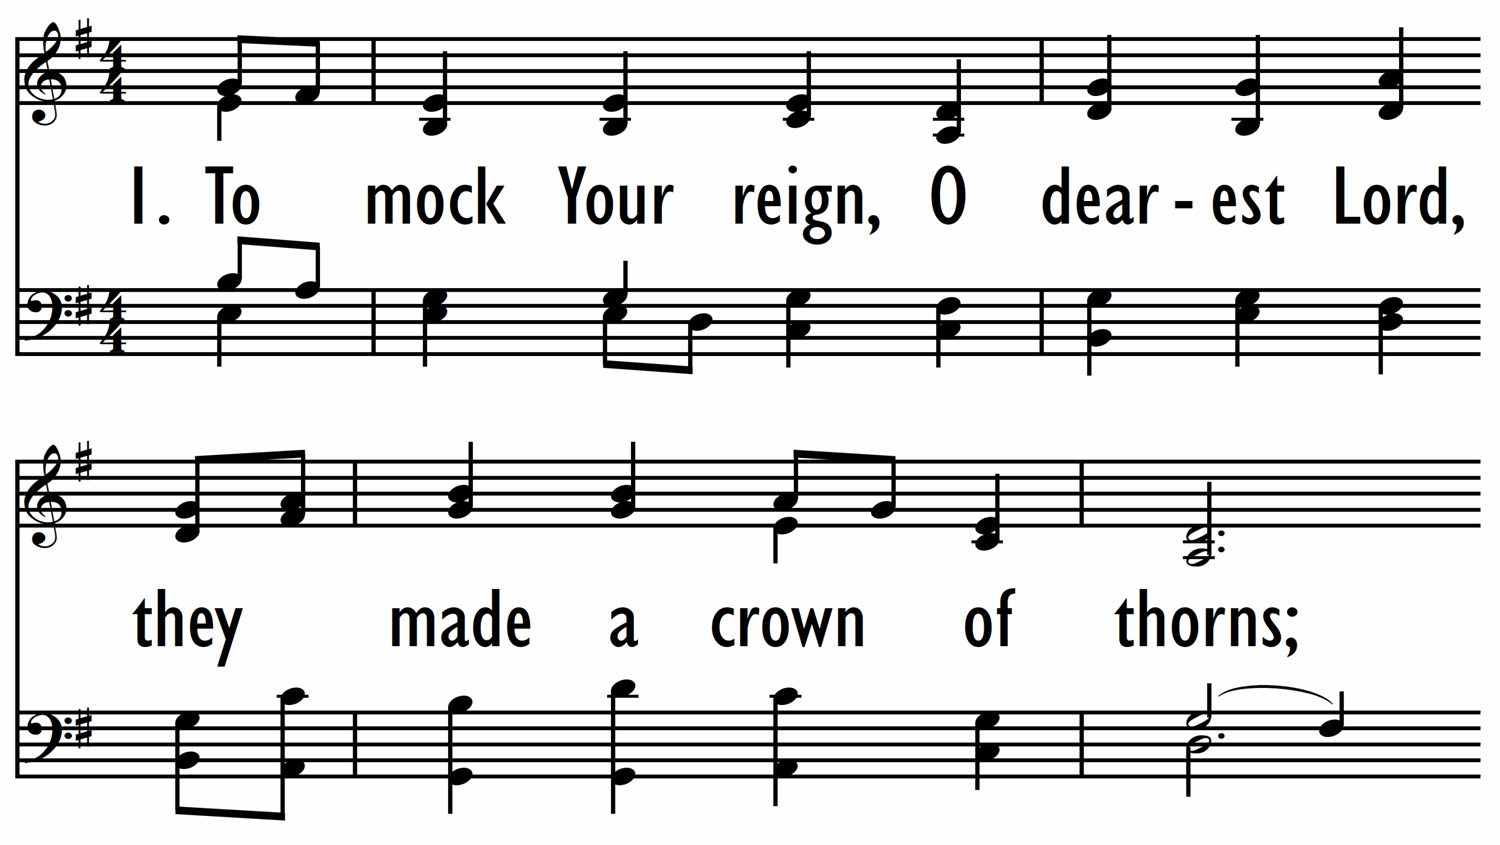 TO MOCK YOUR REIGN, O DEAREST LORD-ppt